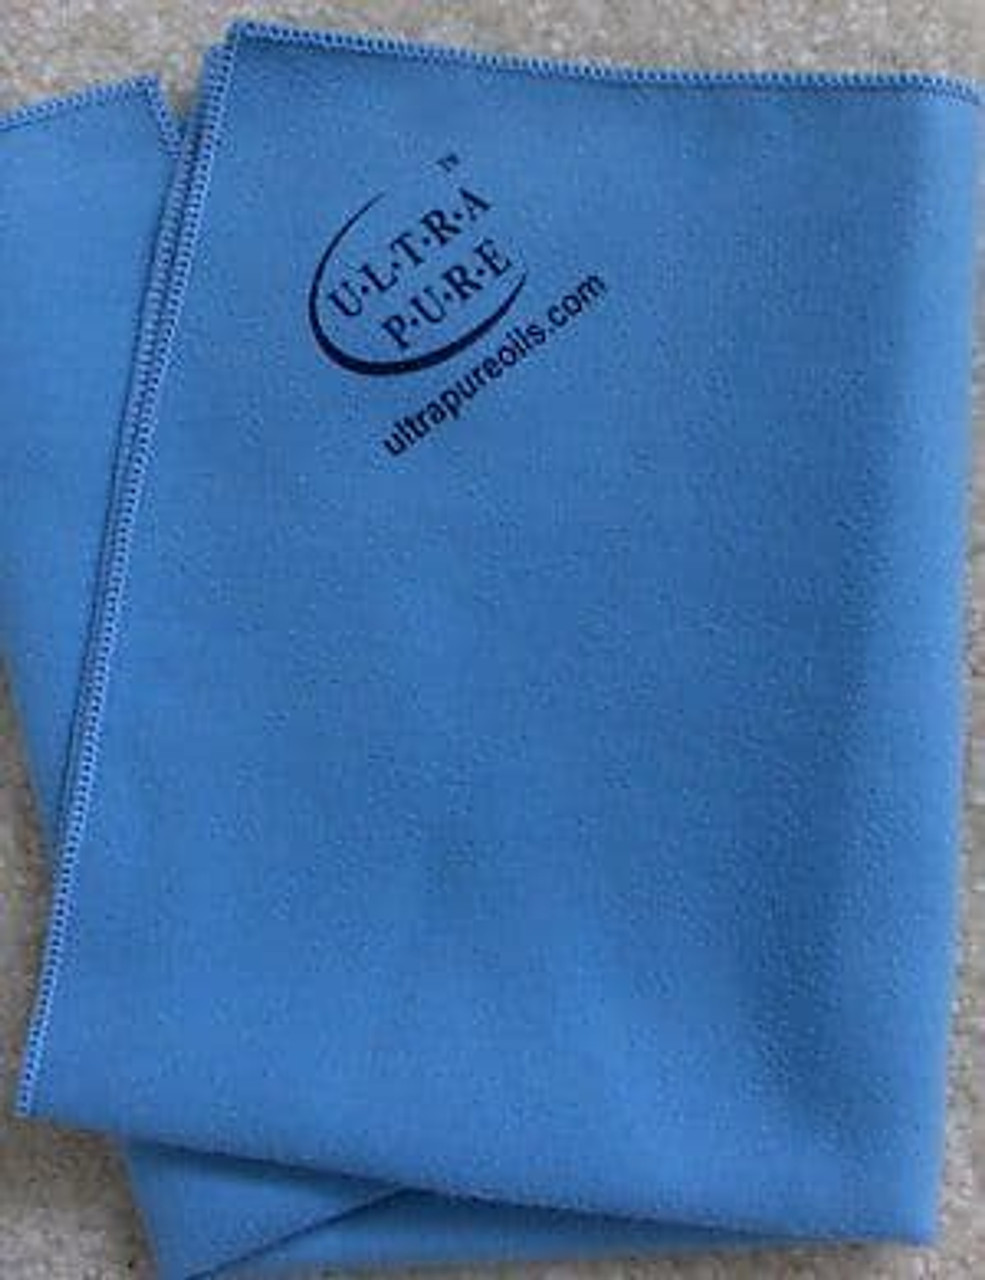 Silver Polishing Cloth - Pocket Sized Microfibre Cleaning Cloth